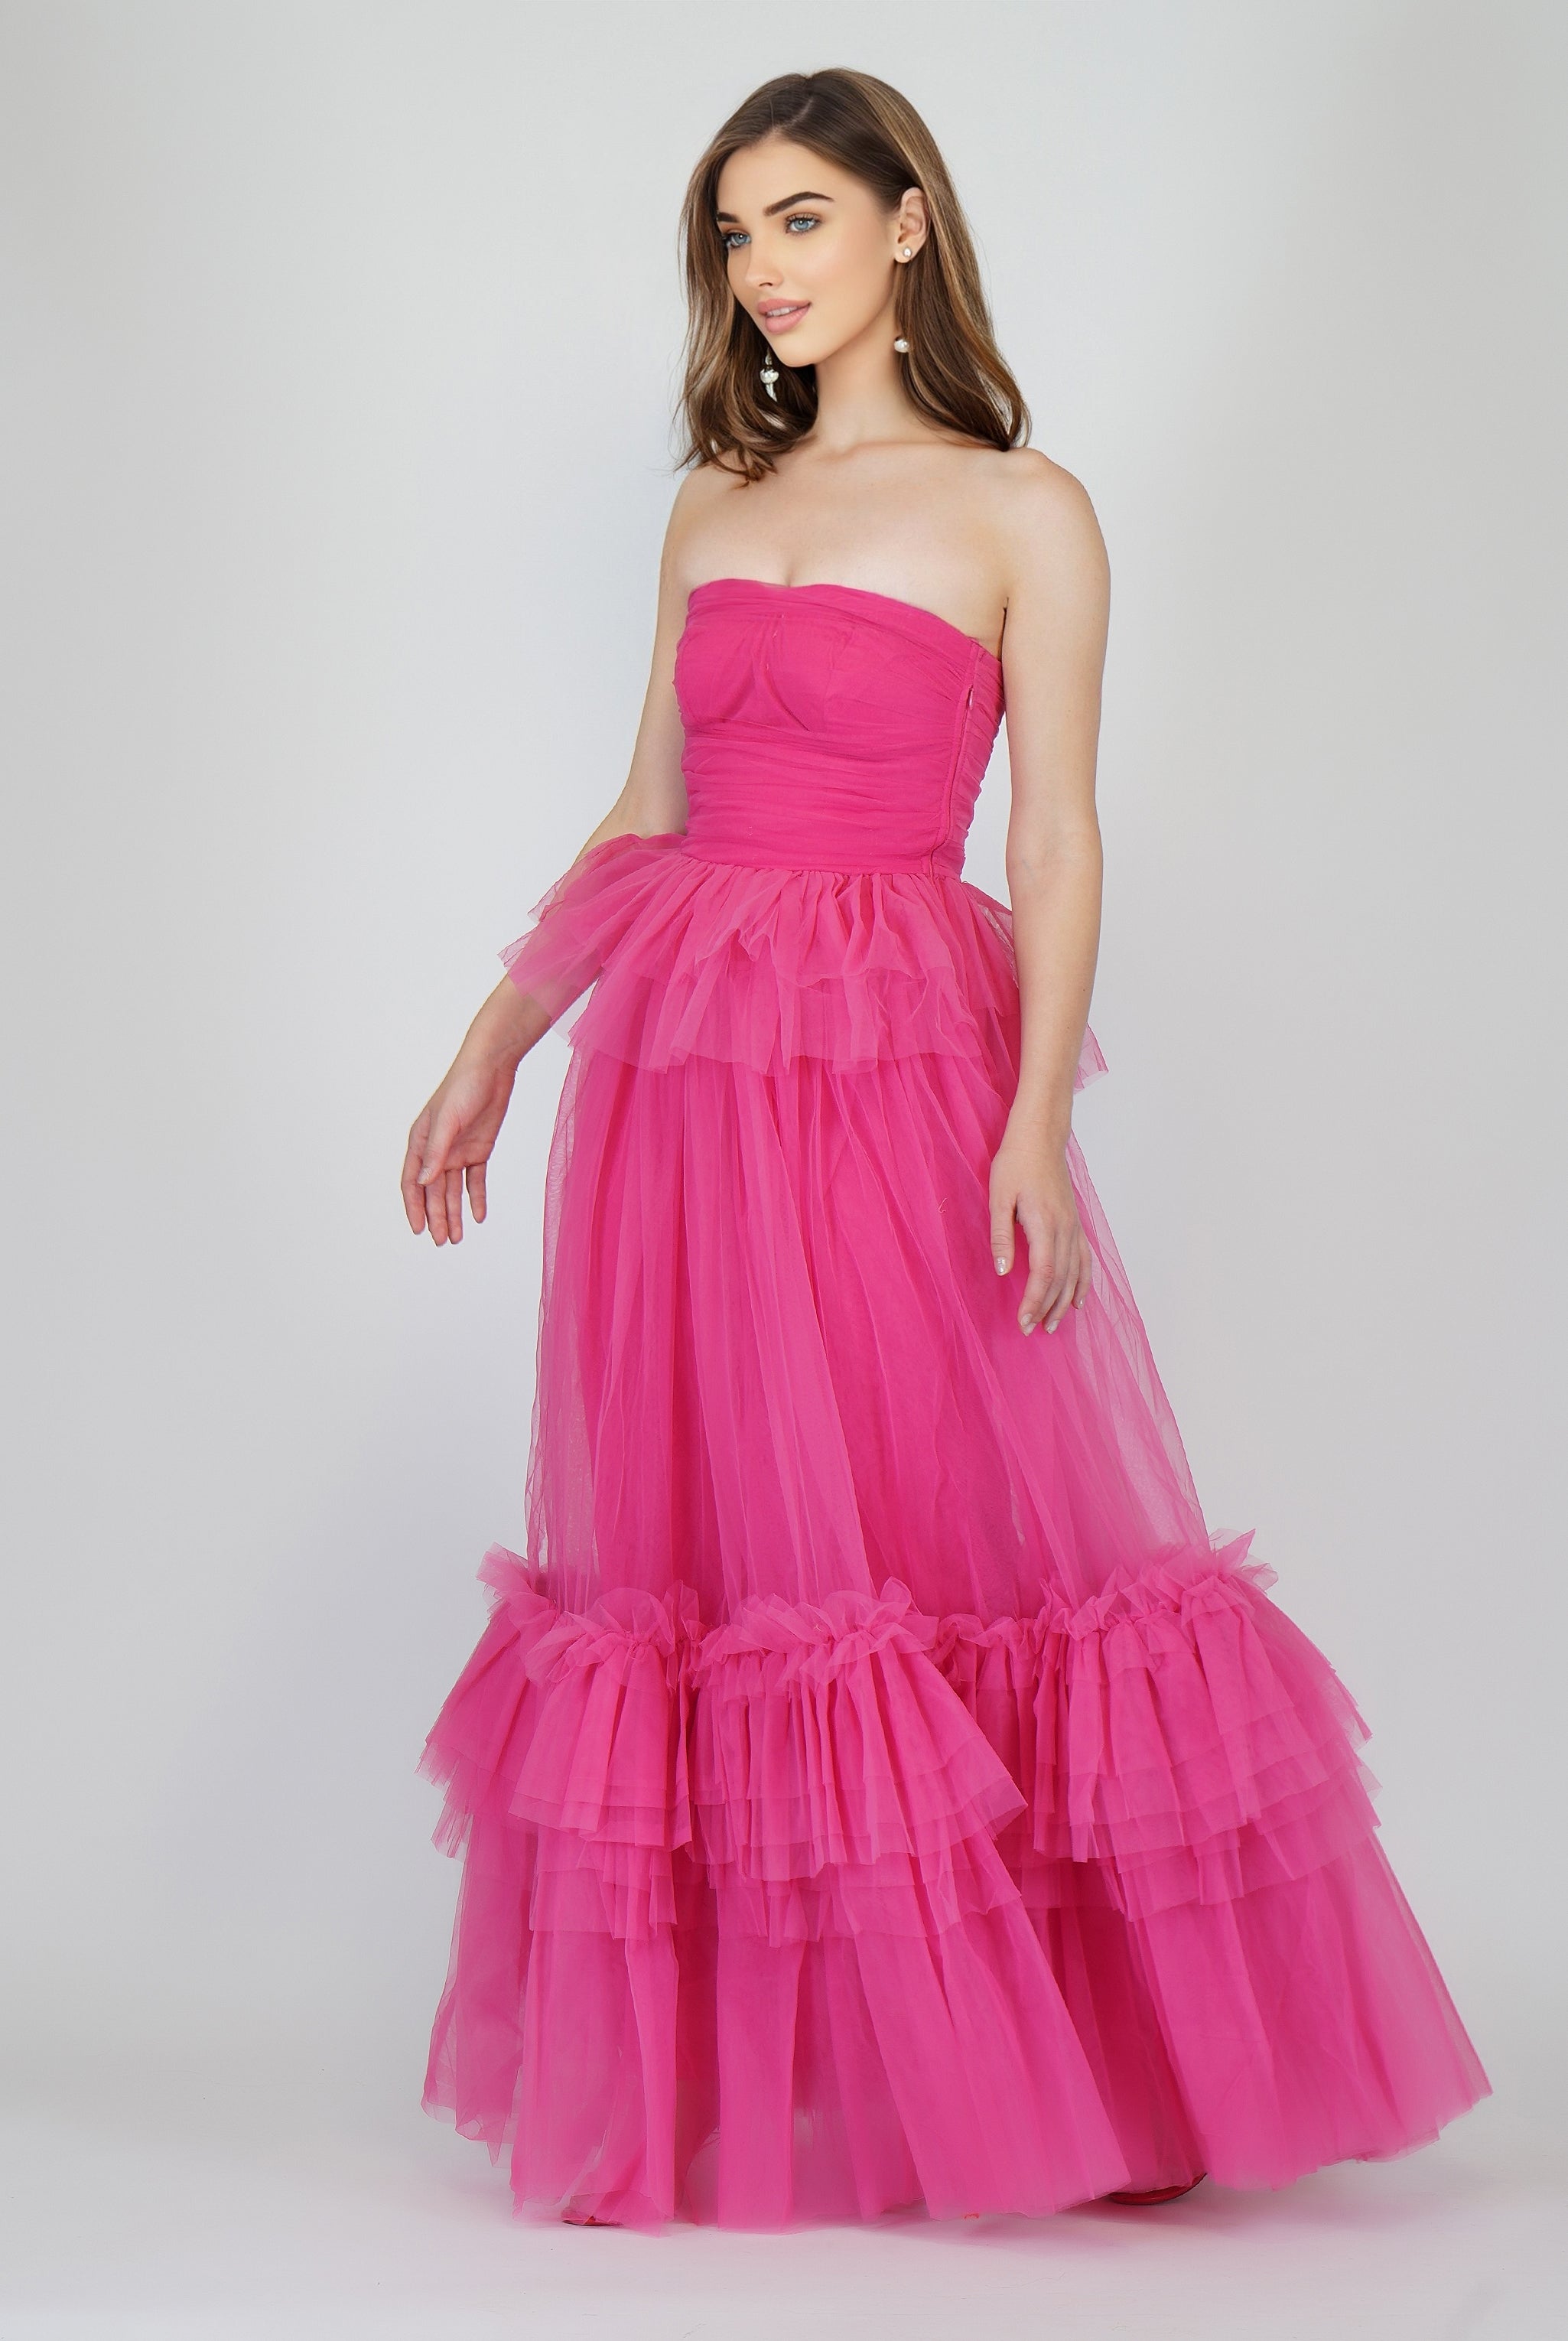 Ana Pink Tulle Dress